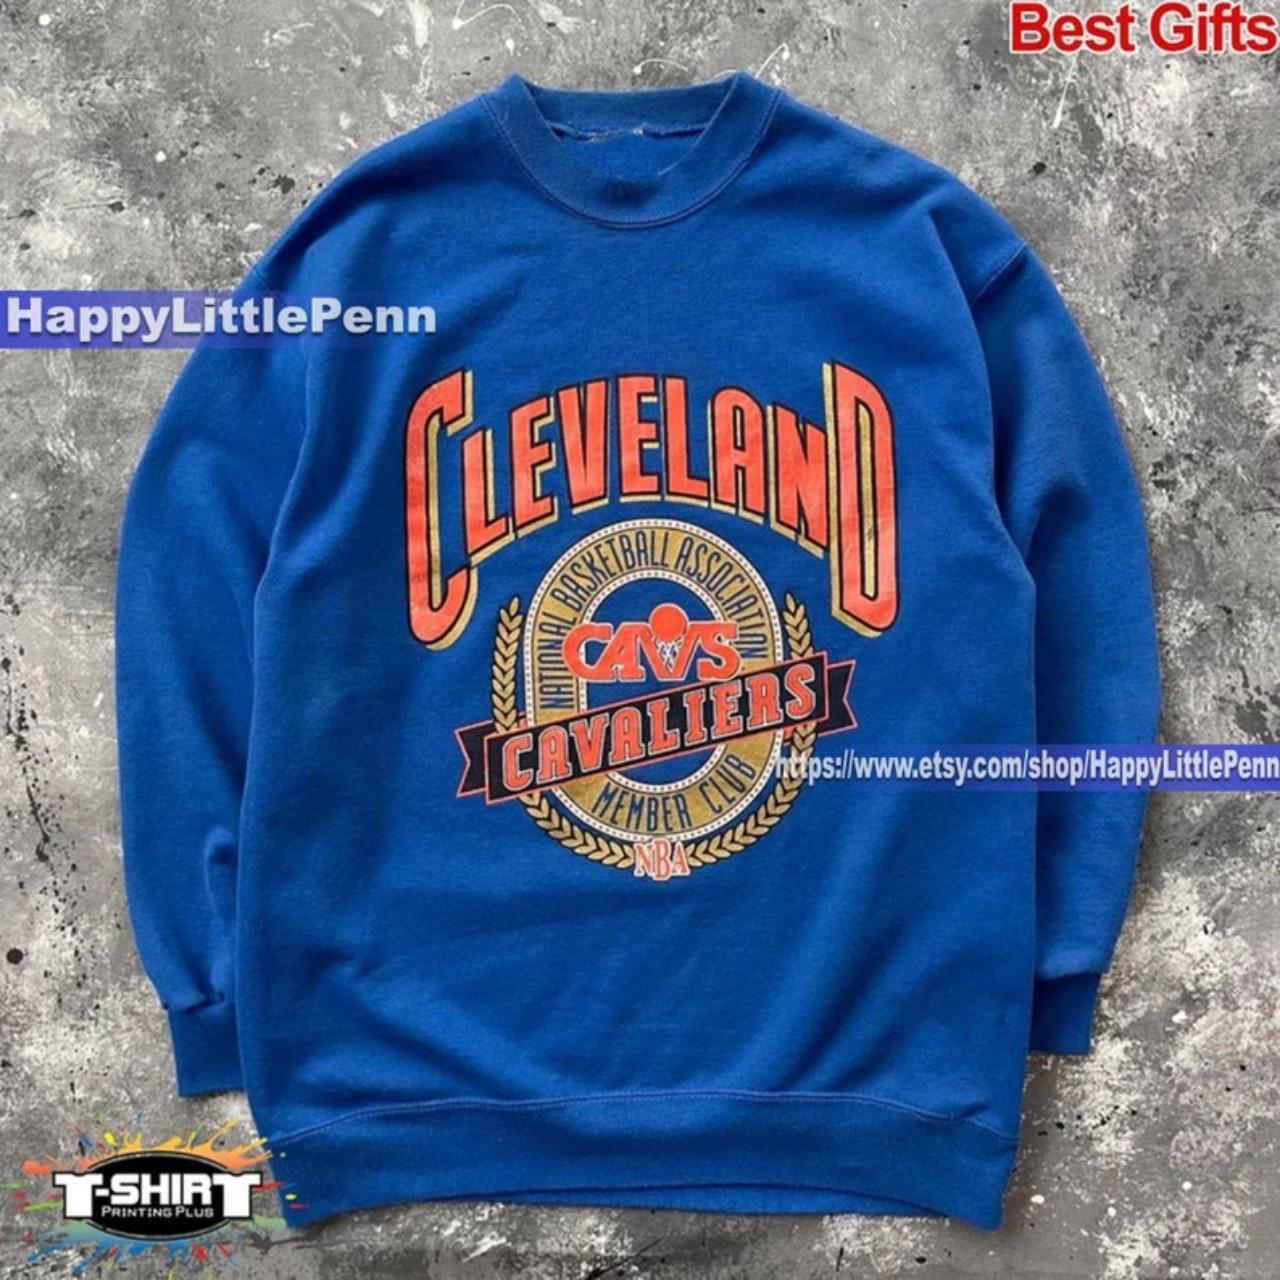 Gildan Cleveland Cavaliers Pullover Hoodie Red M